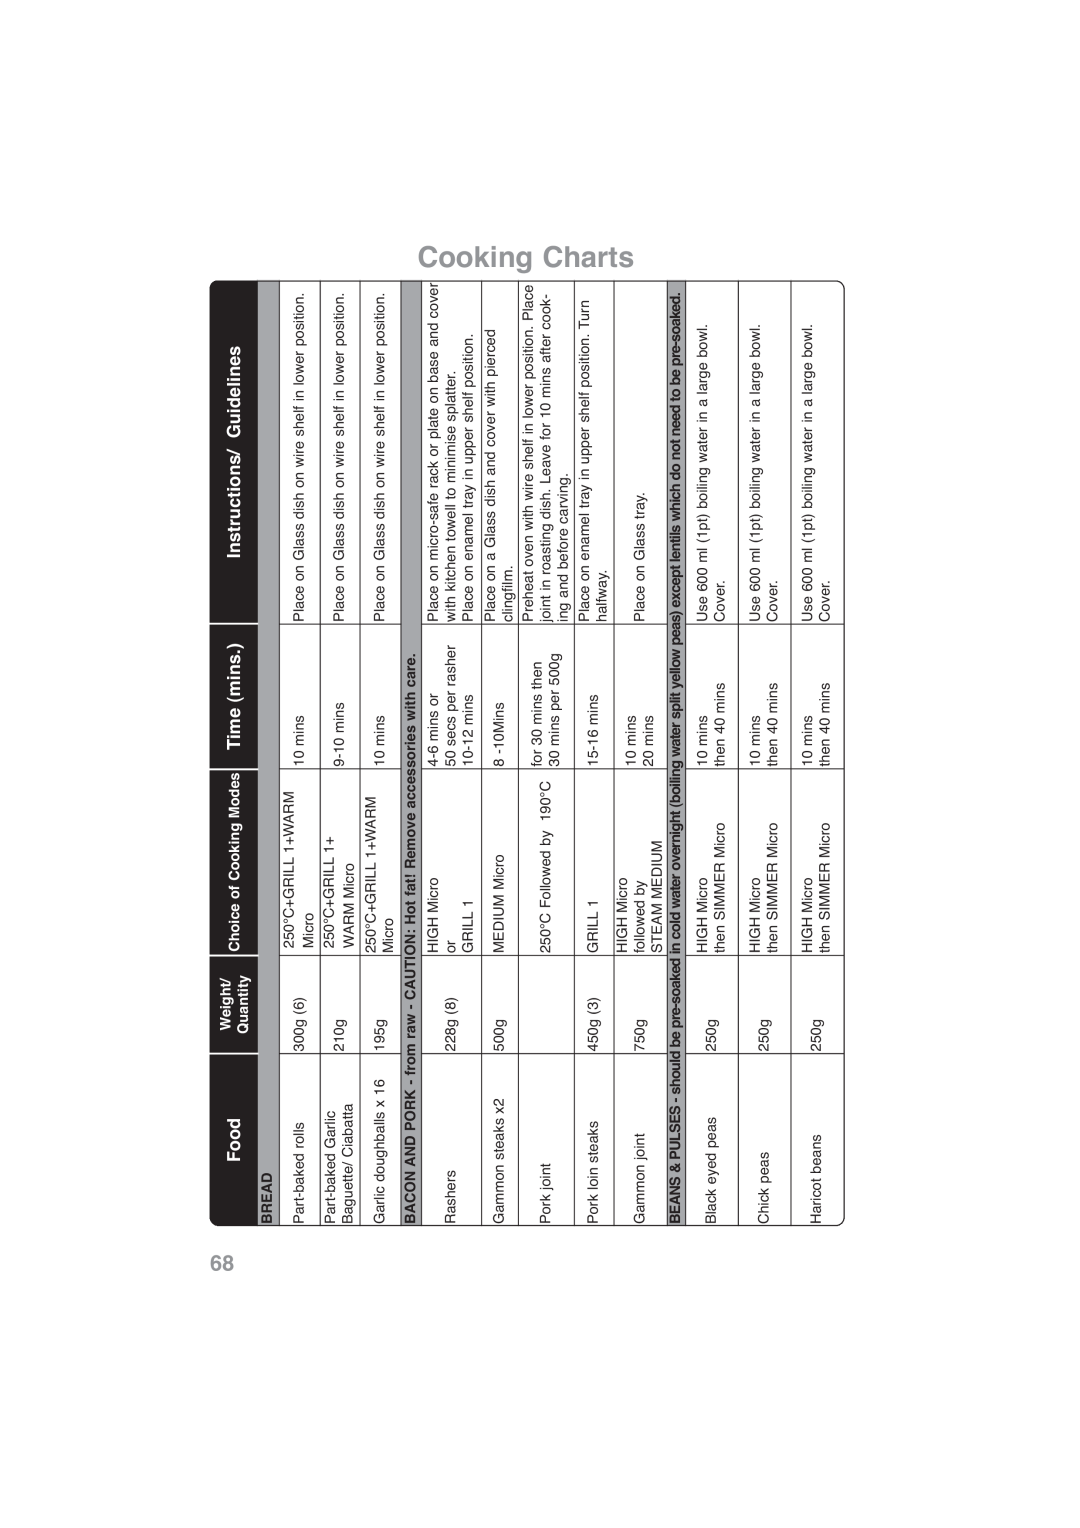 Panasonic NN-CF768M, NN-CF778S Cooking Charts, Food, Time mins, Instructions/ Guidelines, Weight, Quantity, Bread 